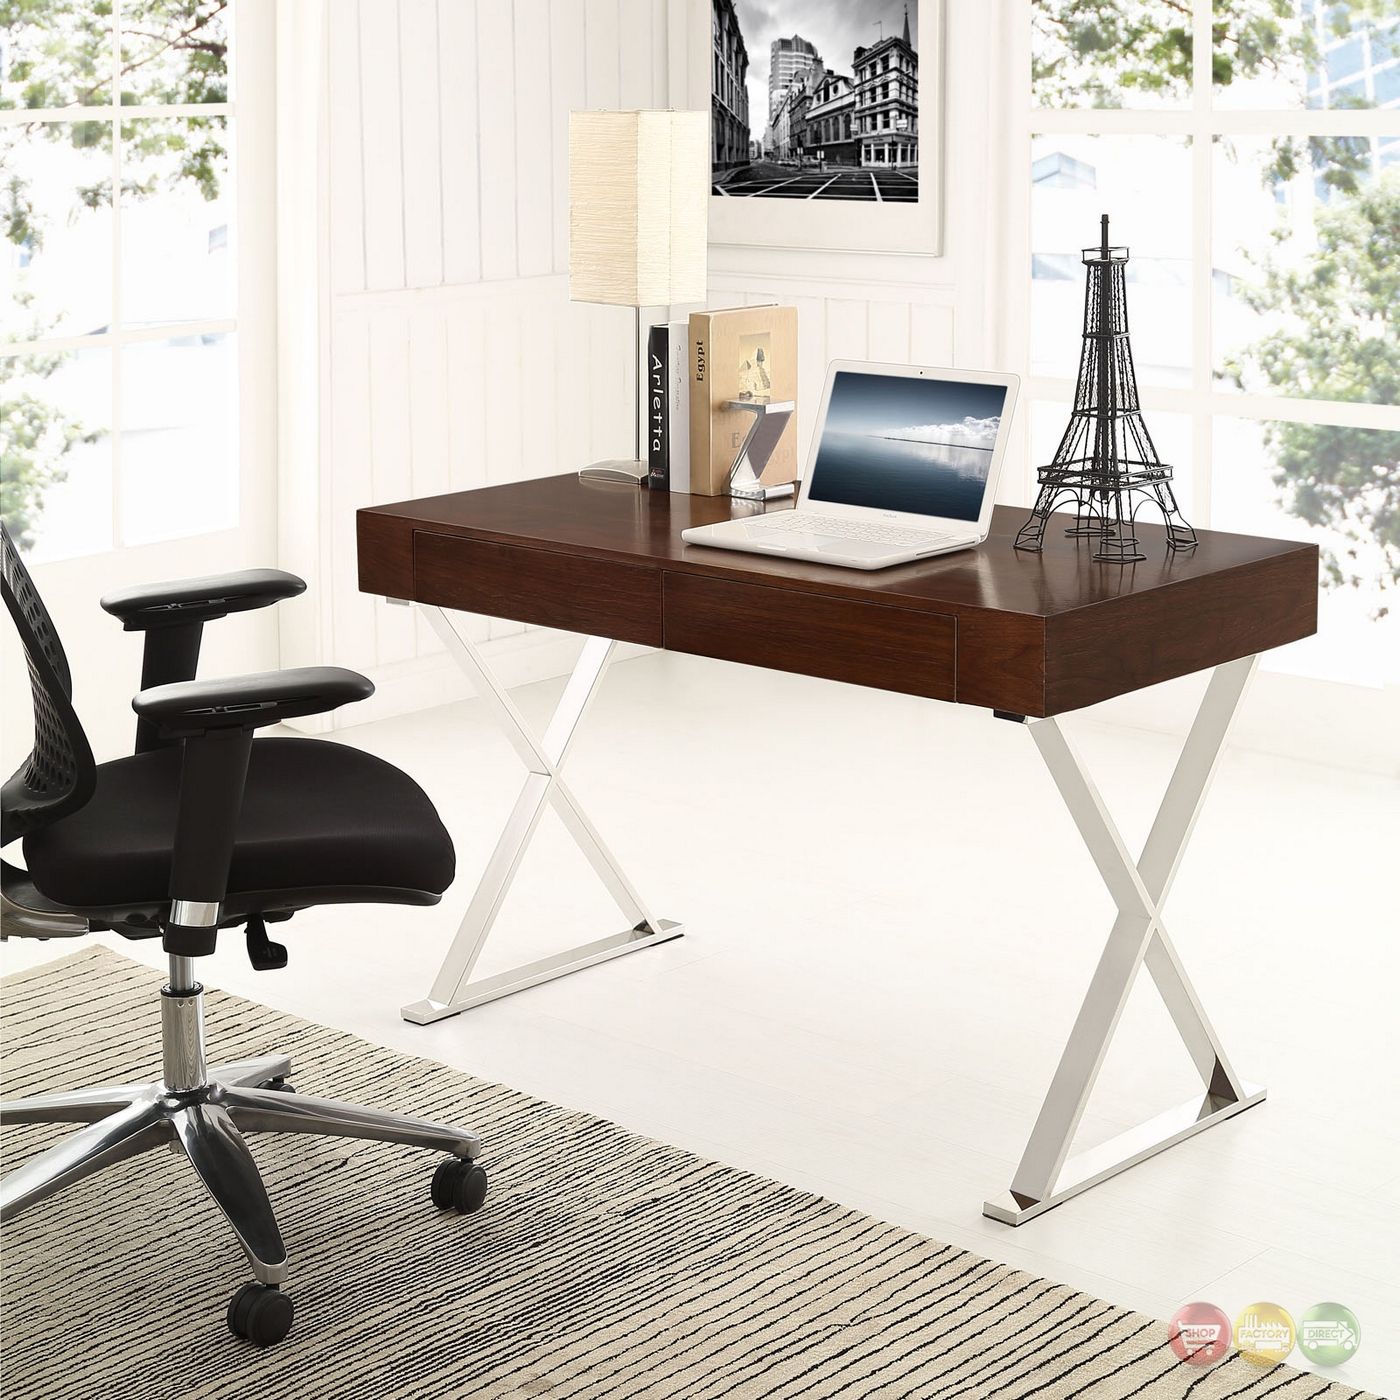 Sector Modern Office Desk With Wood Top & Stainless Steel Frame, Walnut Pertaining To Walnut Wood And Black Metal Office Desks (View 3 of 15)